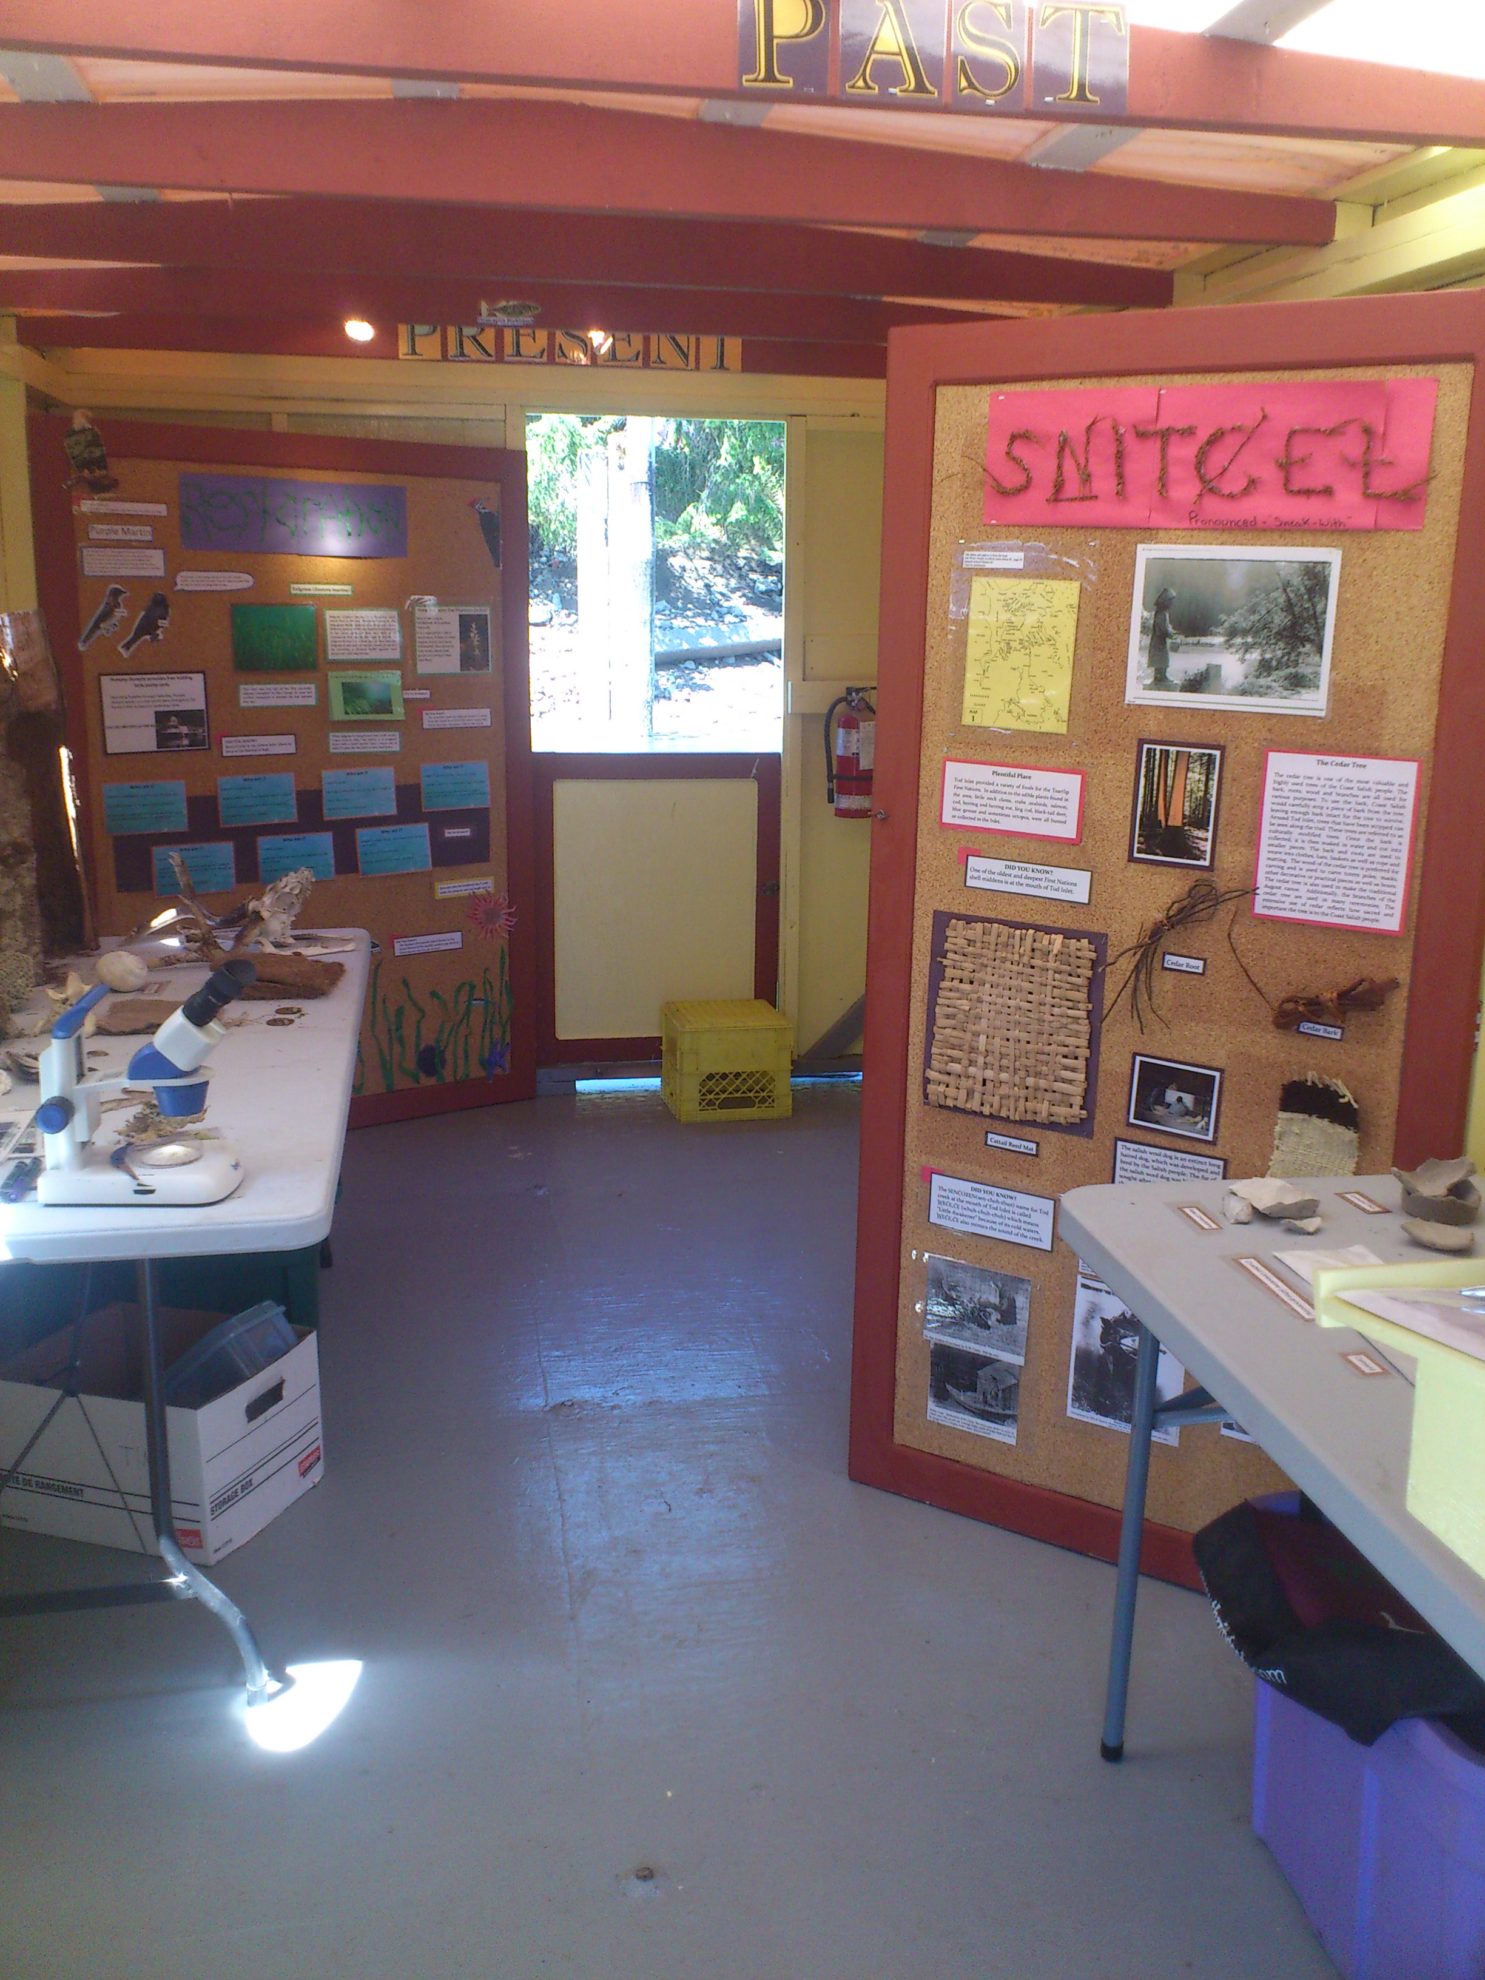 Here is a glimpse of the 2012 displays if you didn't get a chance to stop by.